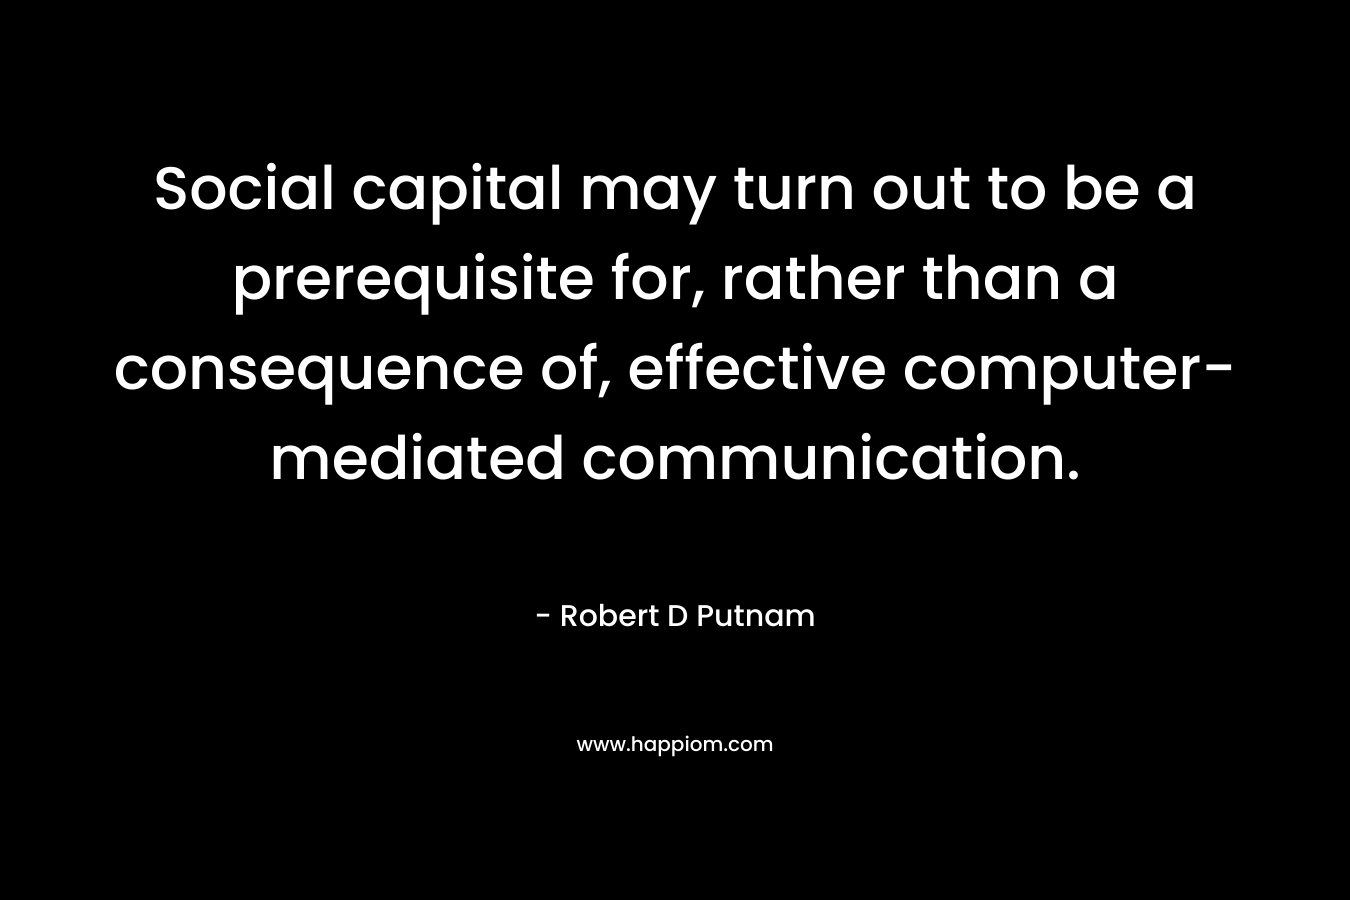 Social capital may turn out to be a prerequisite for, rather than a consequence of, effective computer-mediated communication. – Robert D Putnam